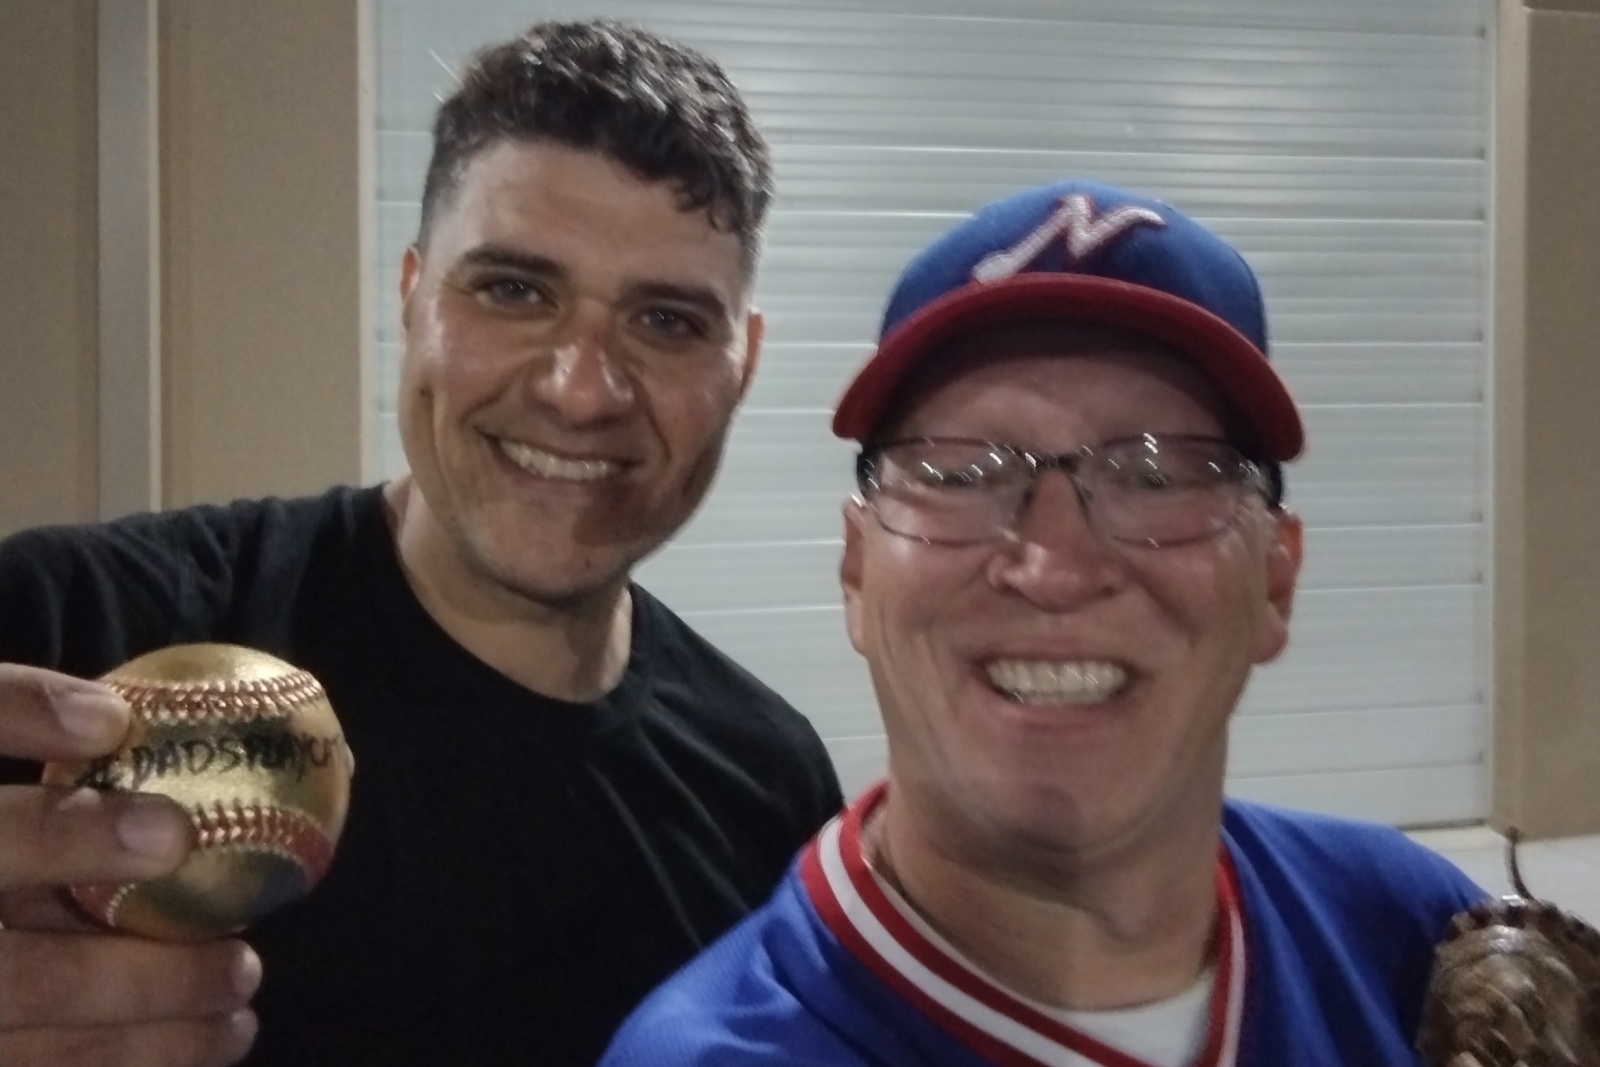 Author Ethan Bryan, right, with catch-playing partner Frank. Frank is holding a gold baseball labeled #DadsPlayCatch